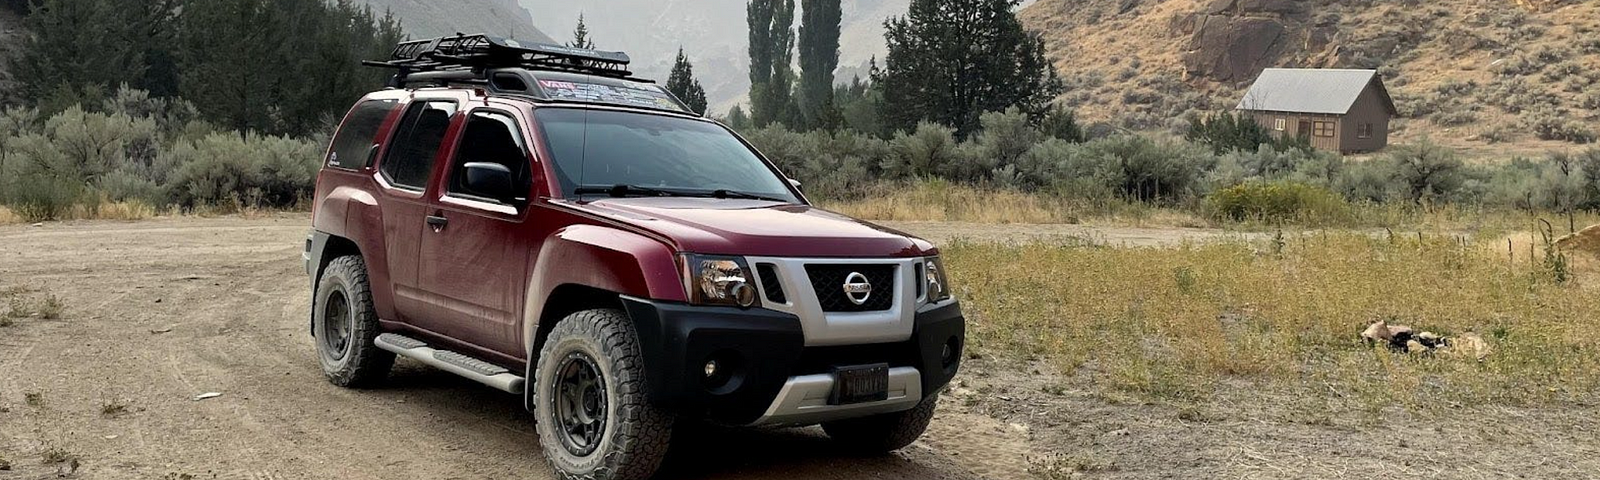 The author’s red 2010 Nissan Xterra S., nicknamed “Big Red” parked on a dirt road.